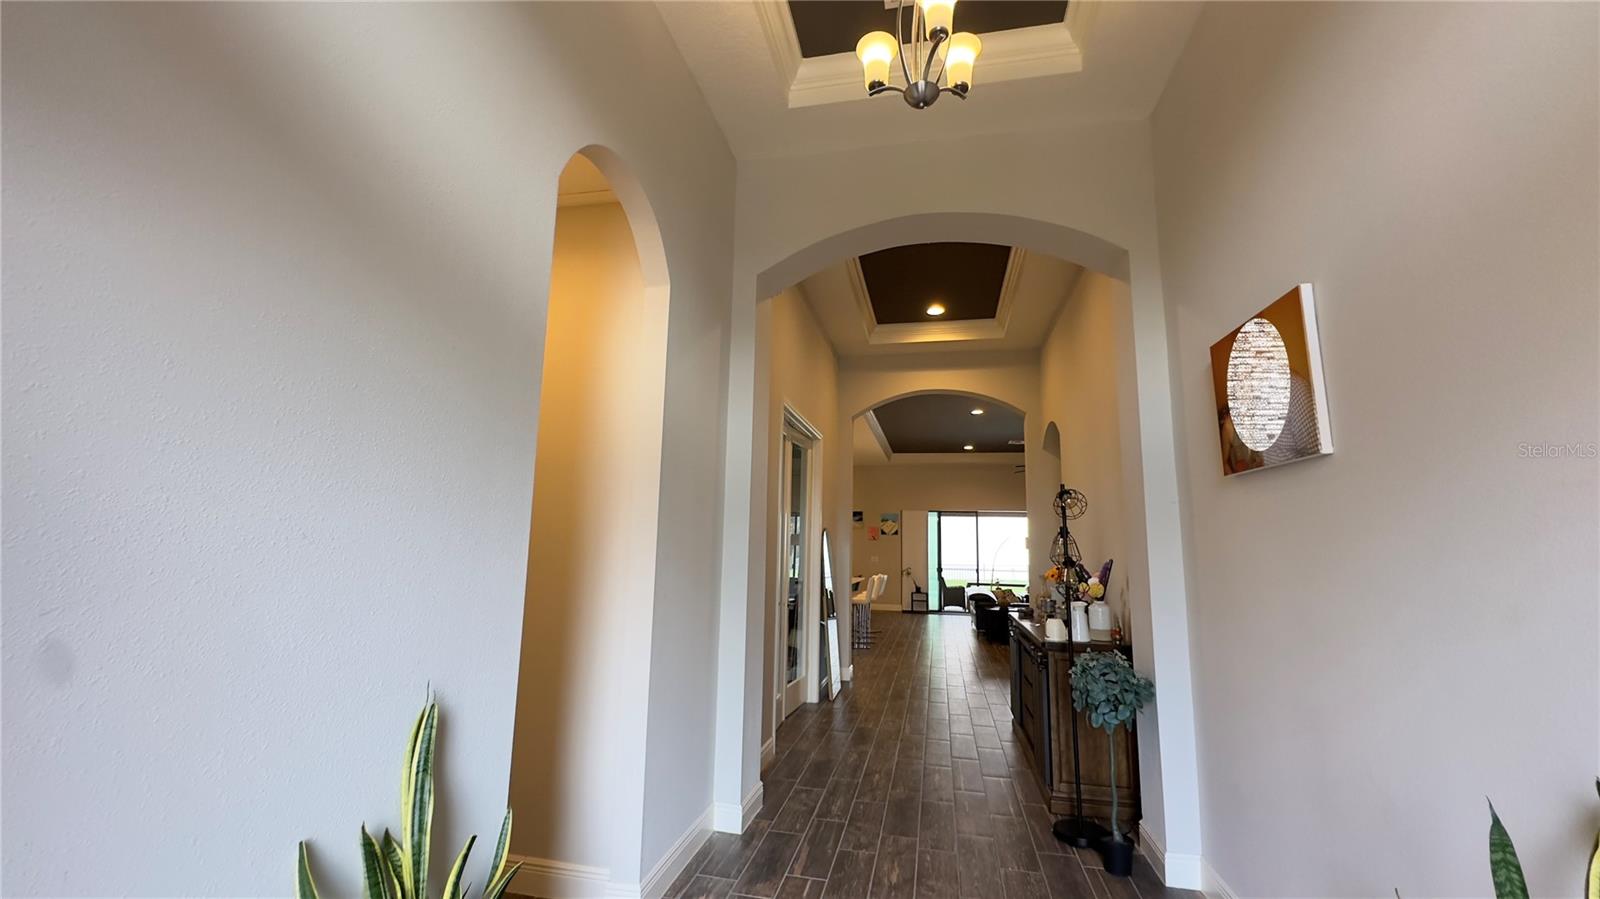 Upon entry, a stunning foyer makes an impressive statement